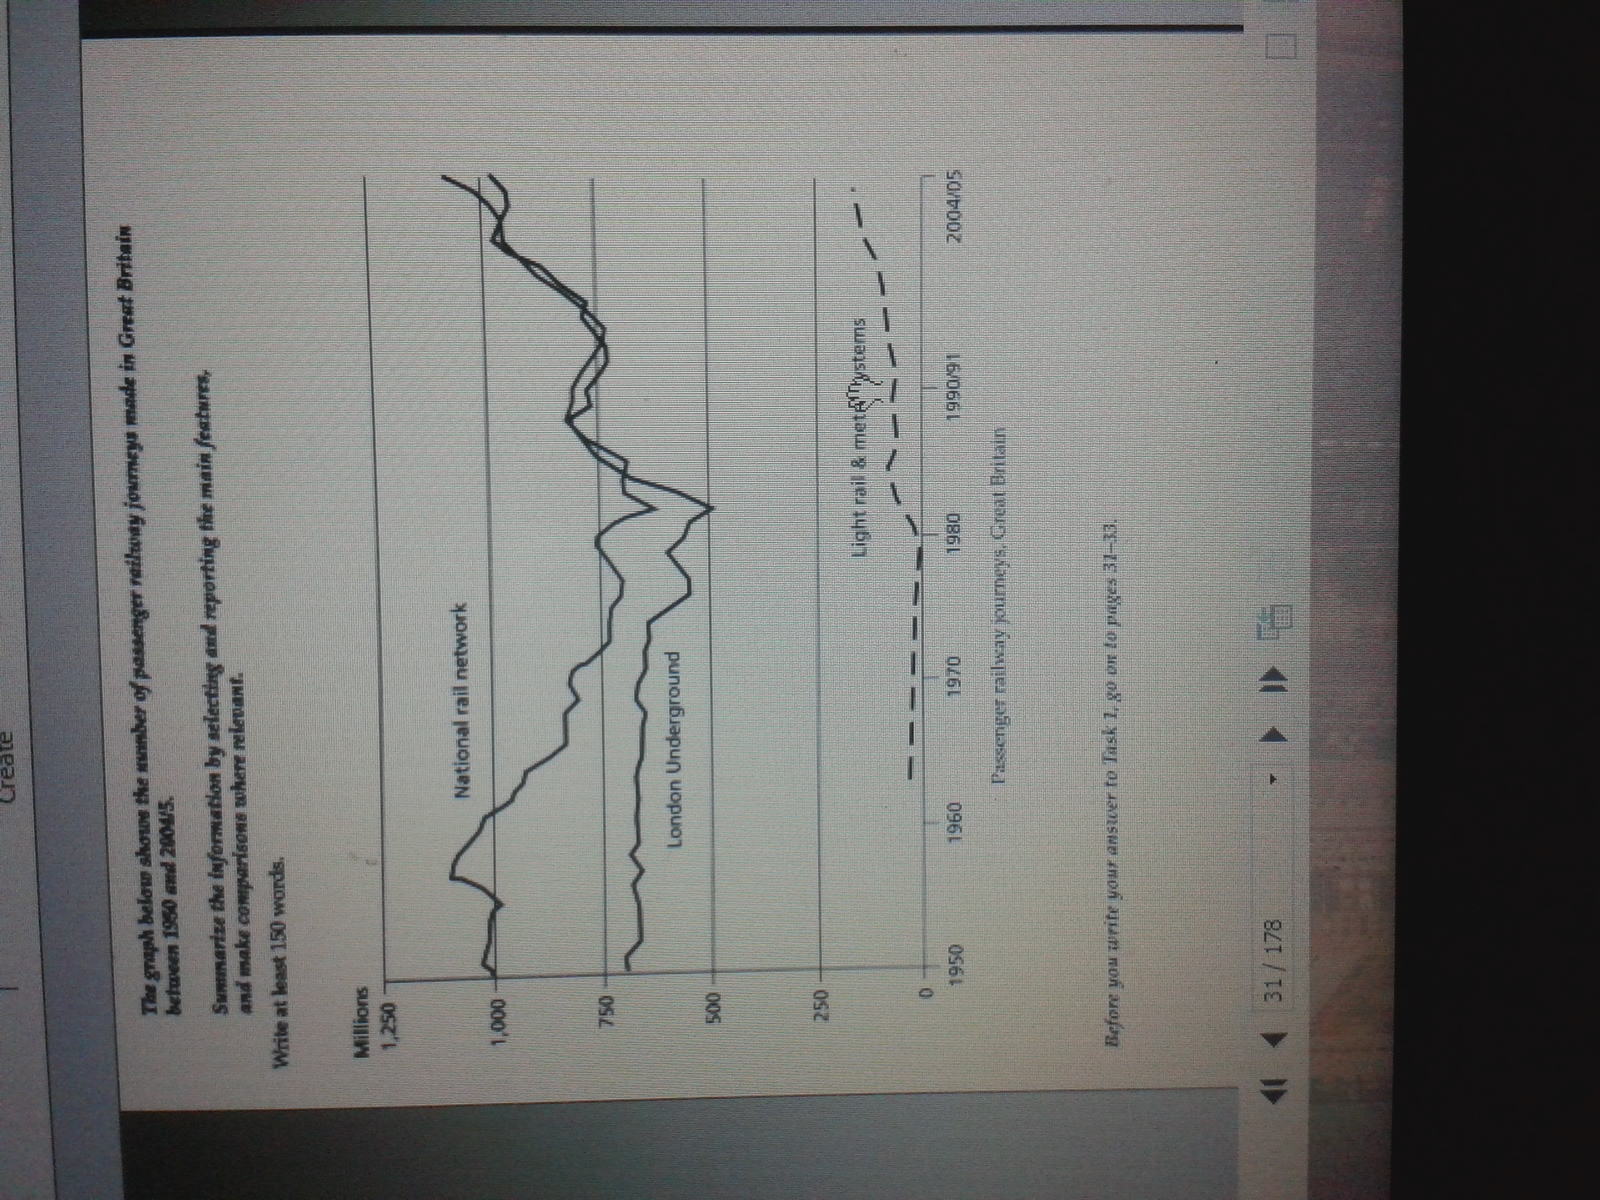 Here is the graph